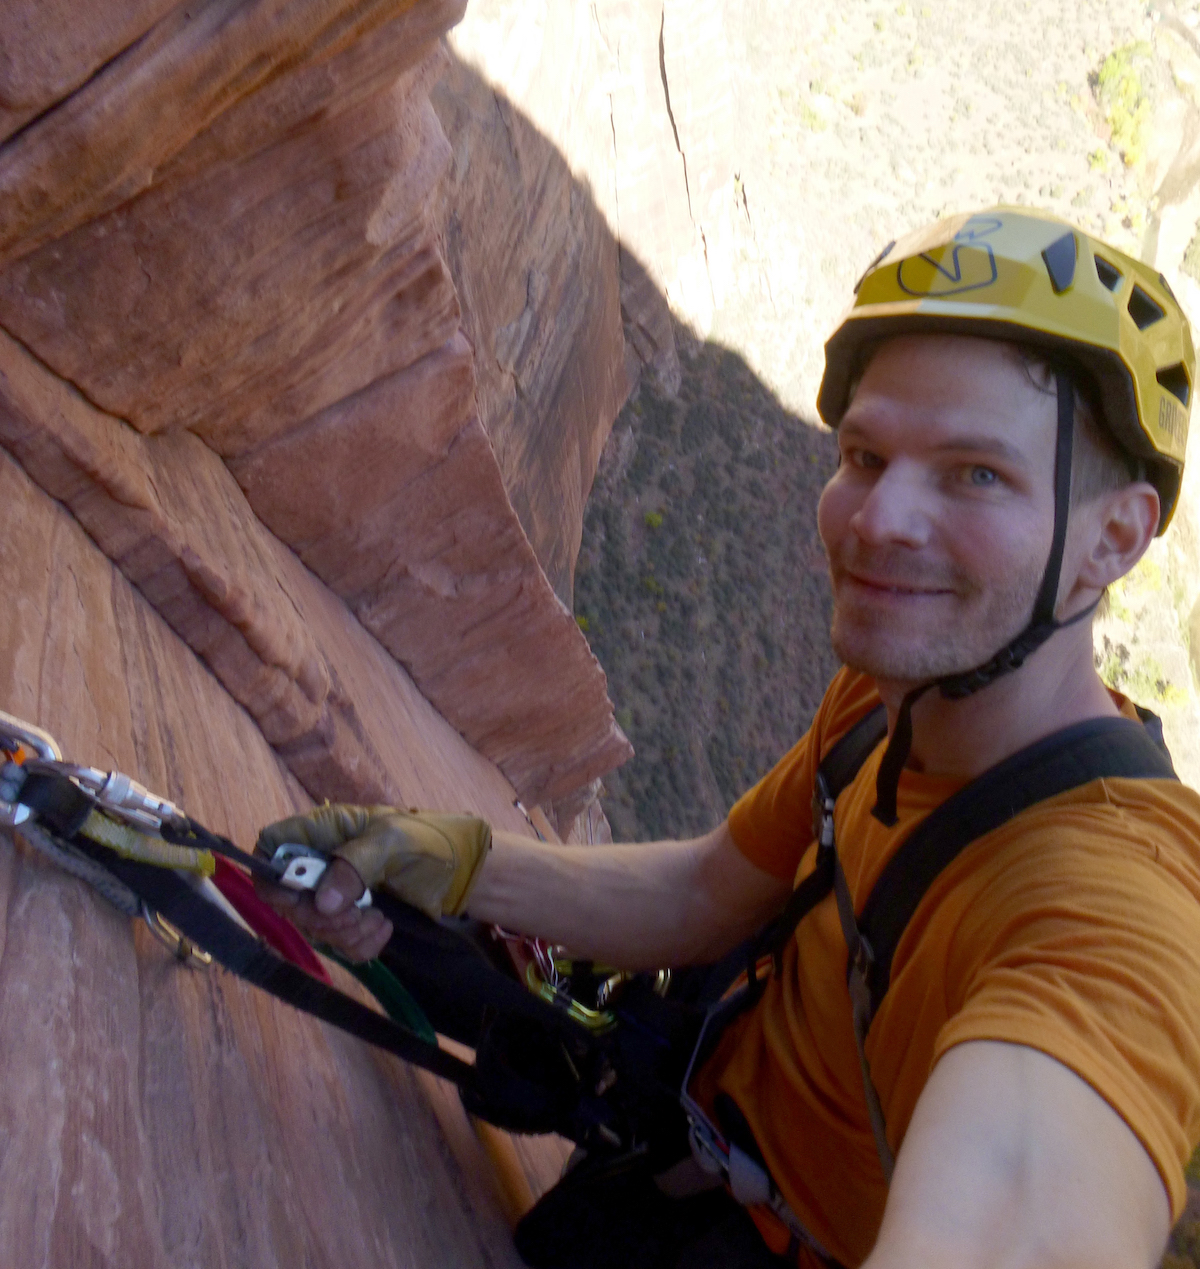 The author wearing the Grivel Stealth Hardshell helmet on the second-to-last pitch of Prodigal Sun in Zion, October 2017. [Photo] Derek Franz